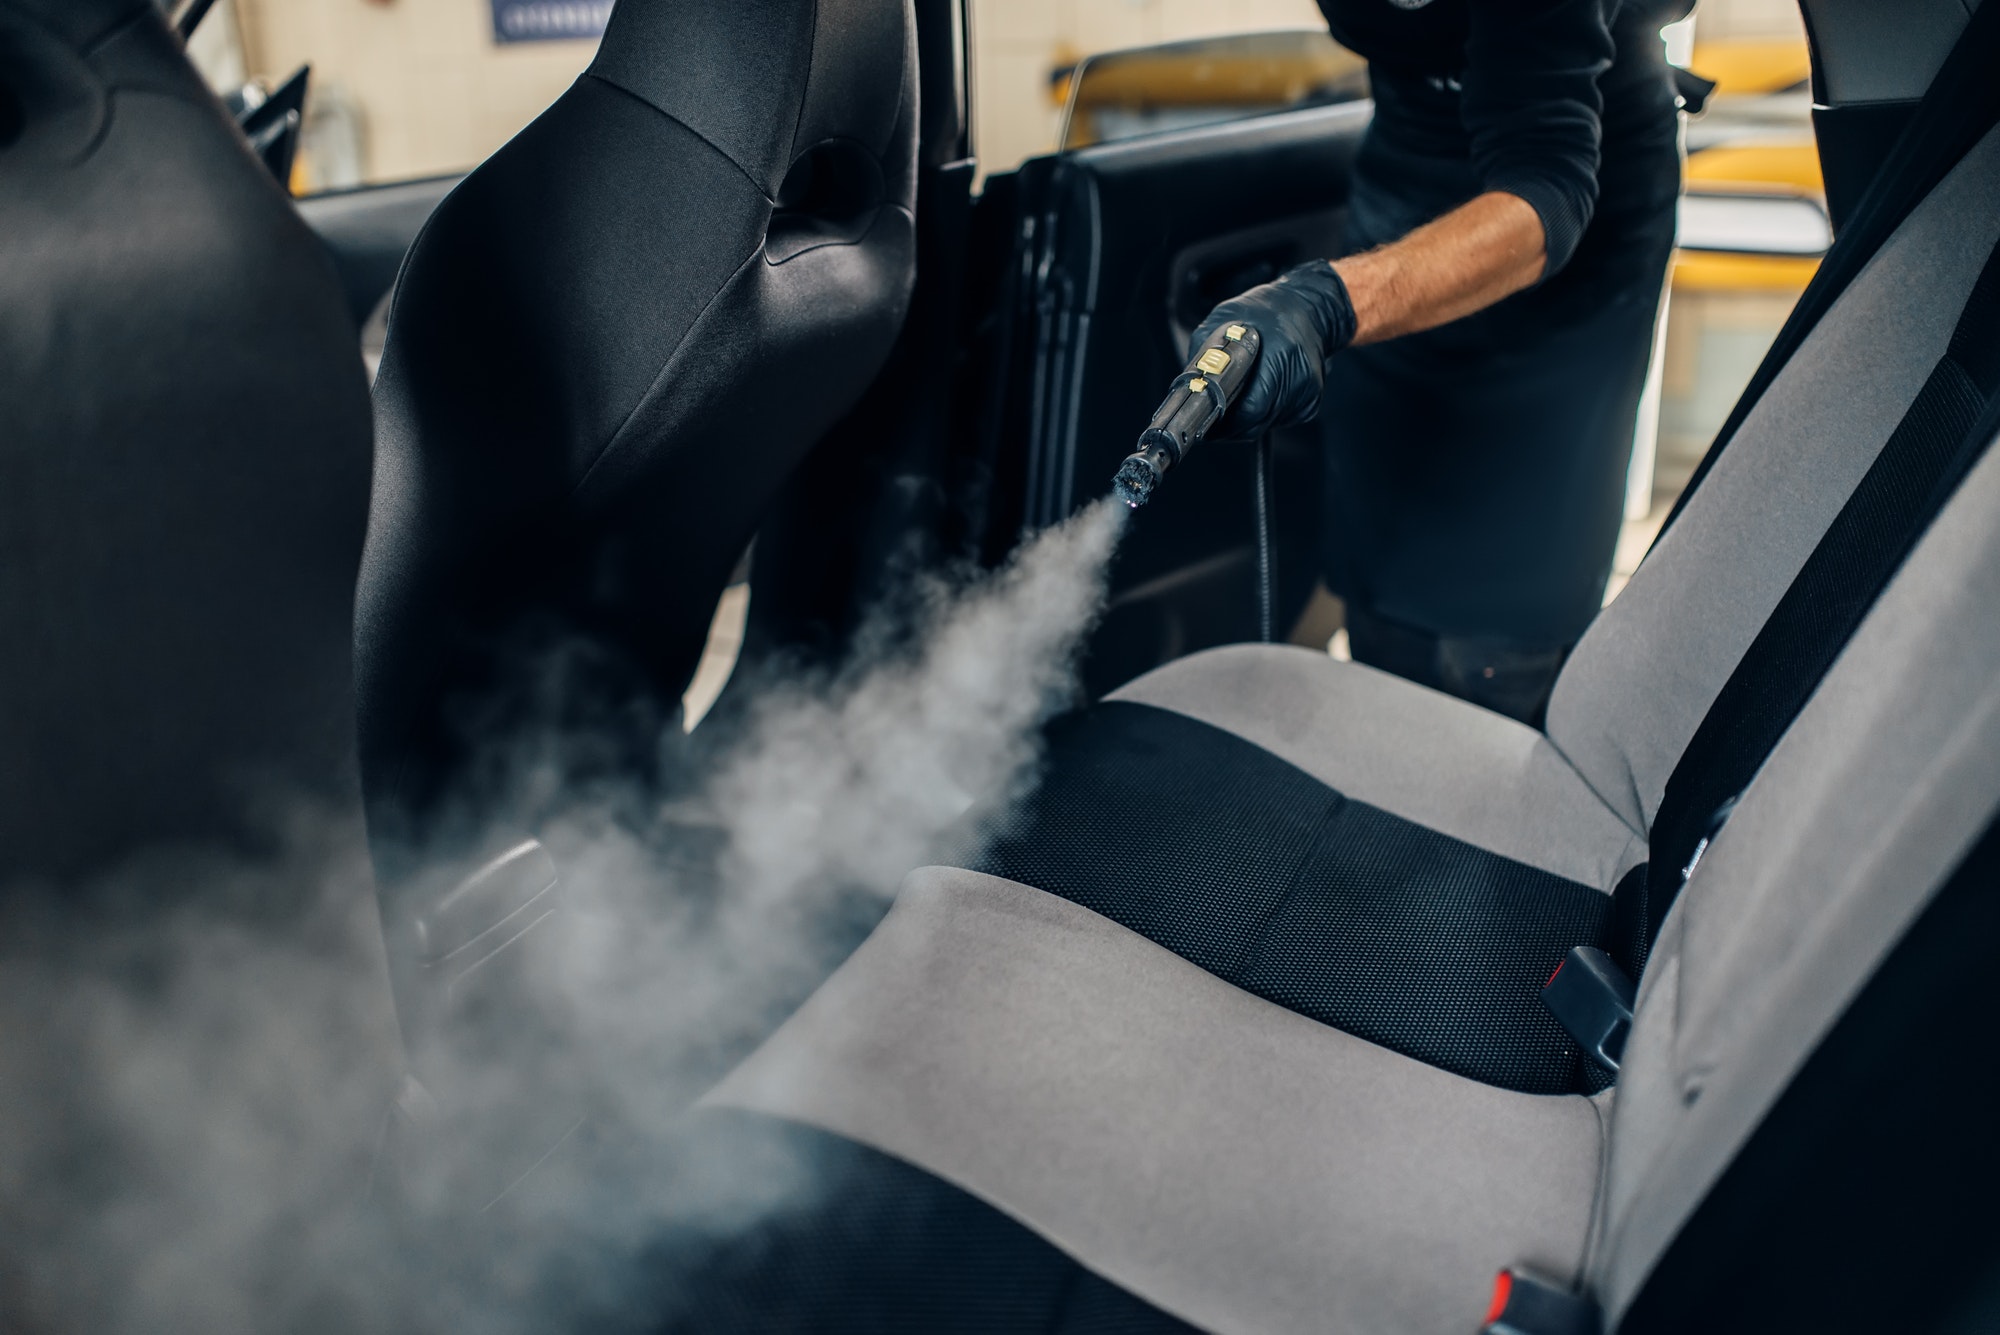 car wash worker cleans seats with steam cleaner